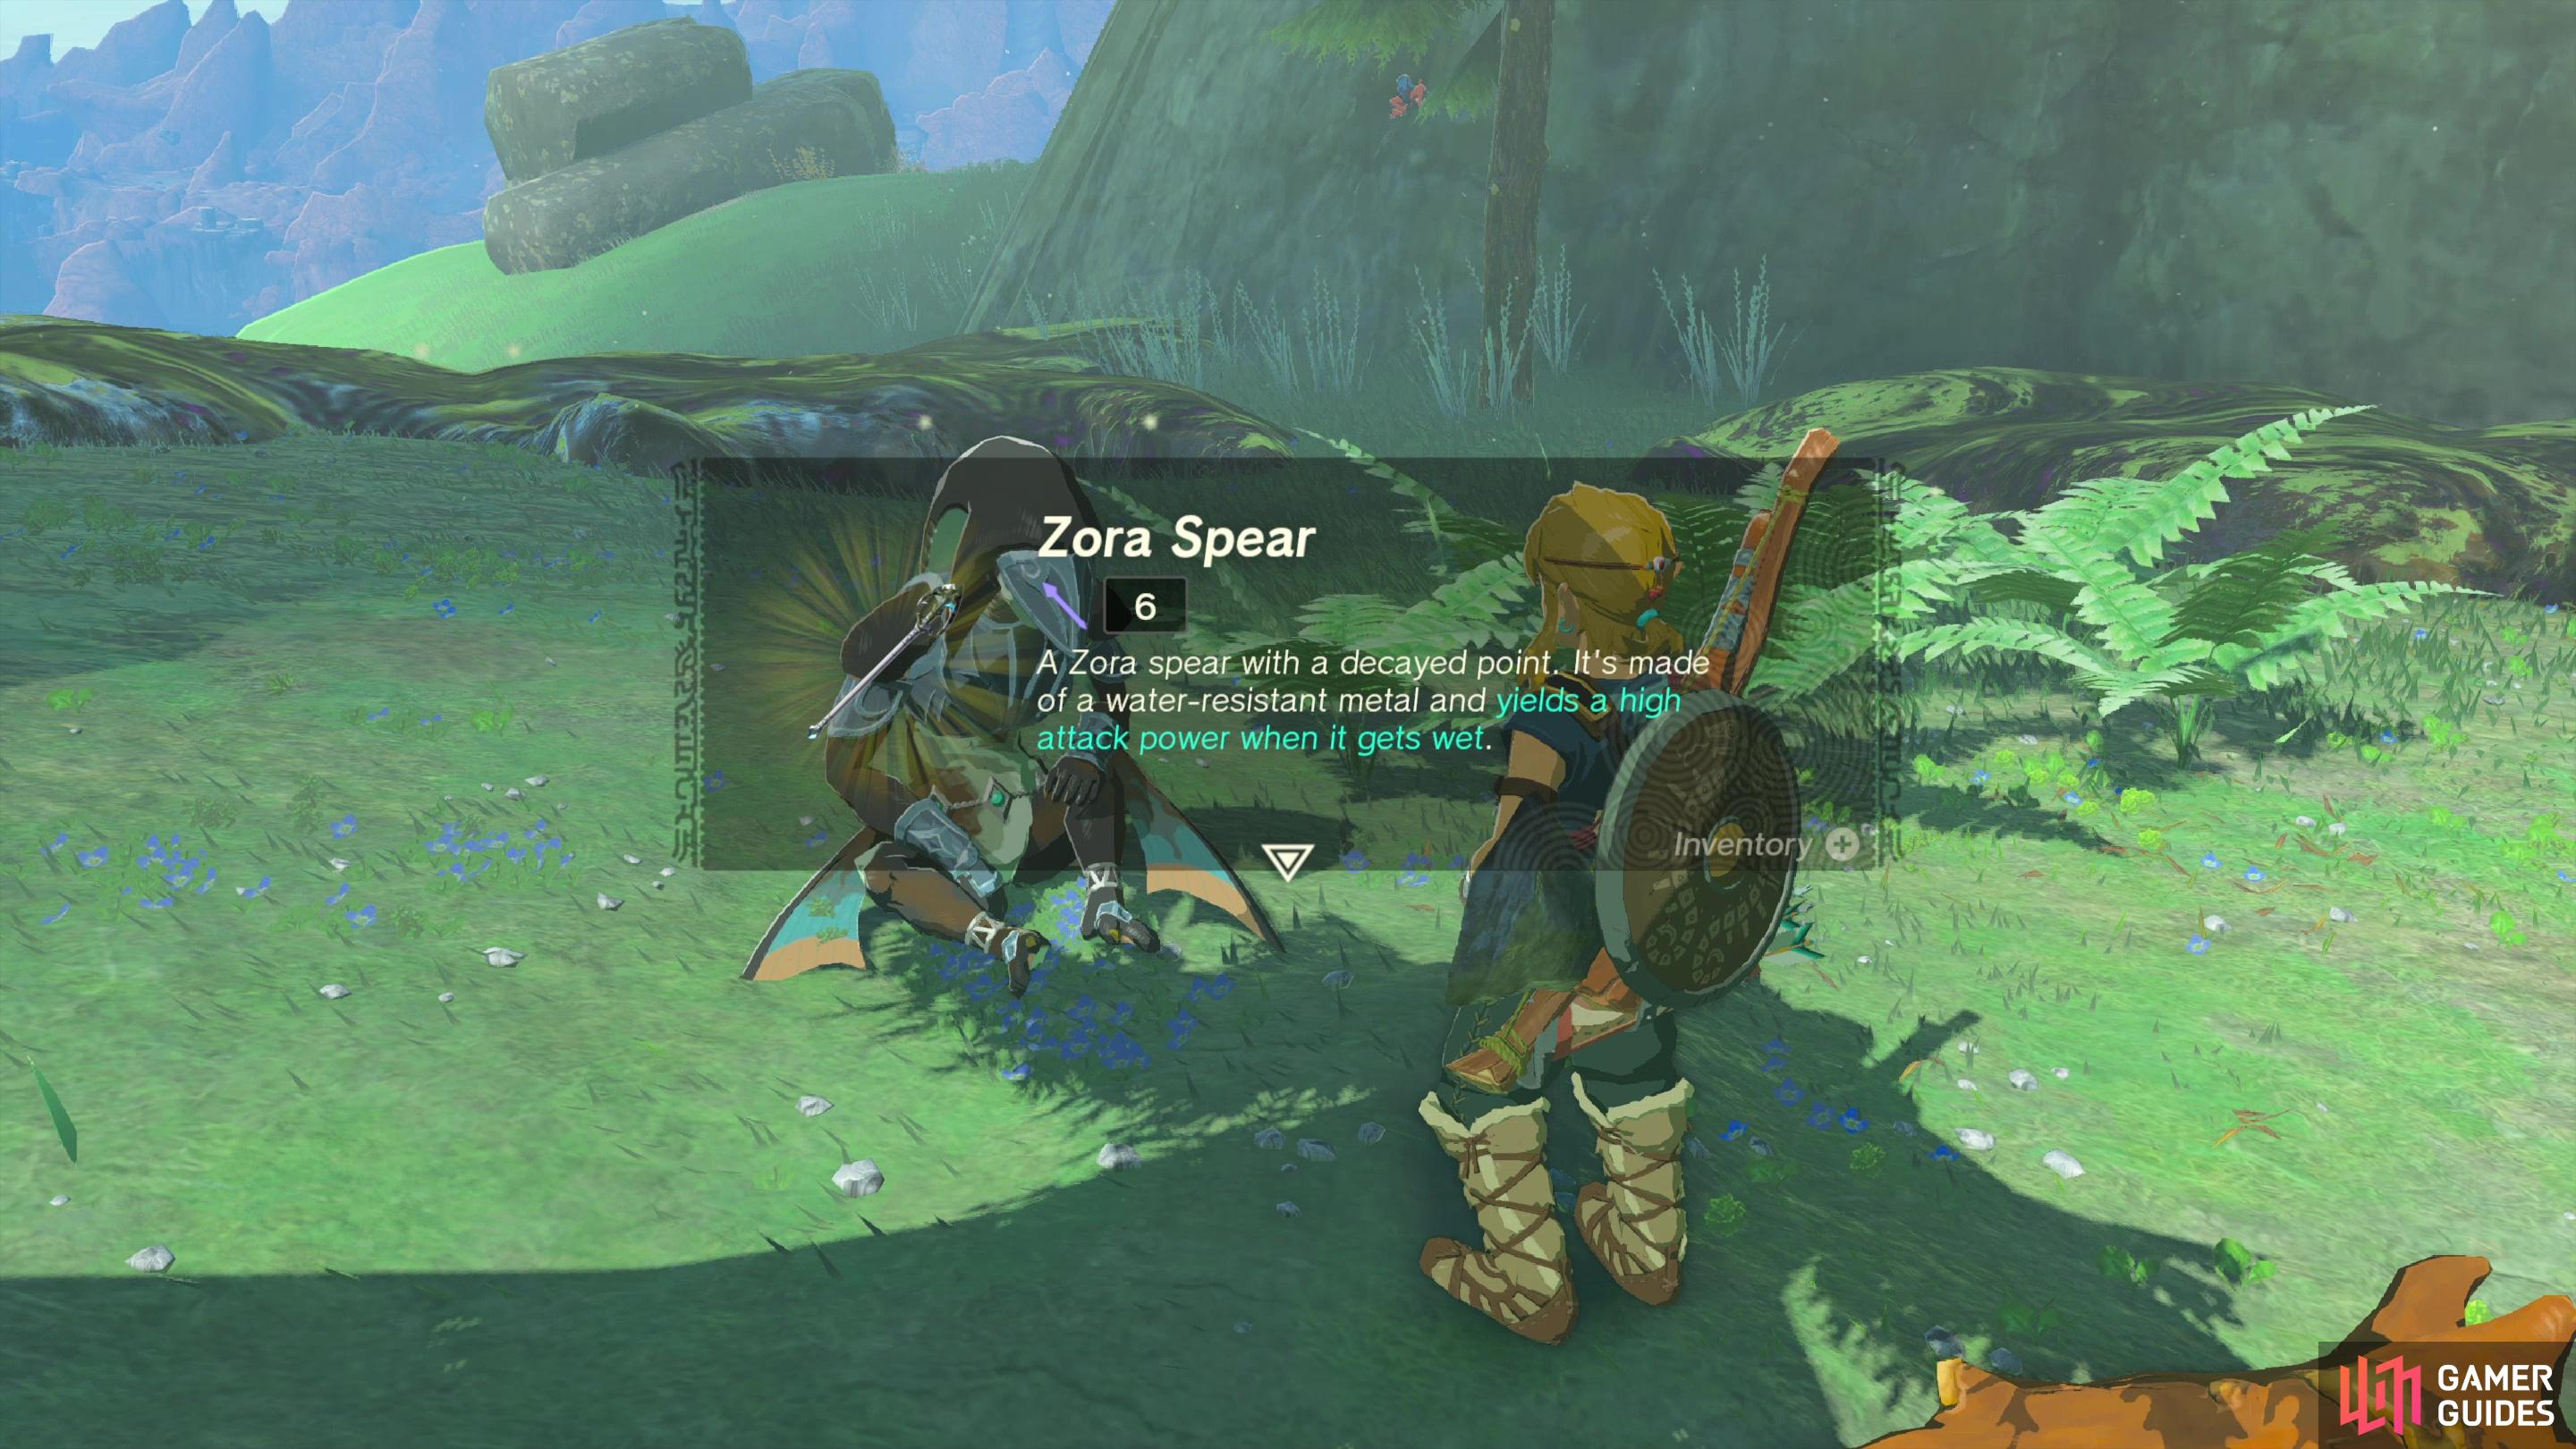 after which he'll reward you with a Zora Spear.